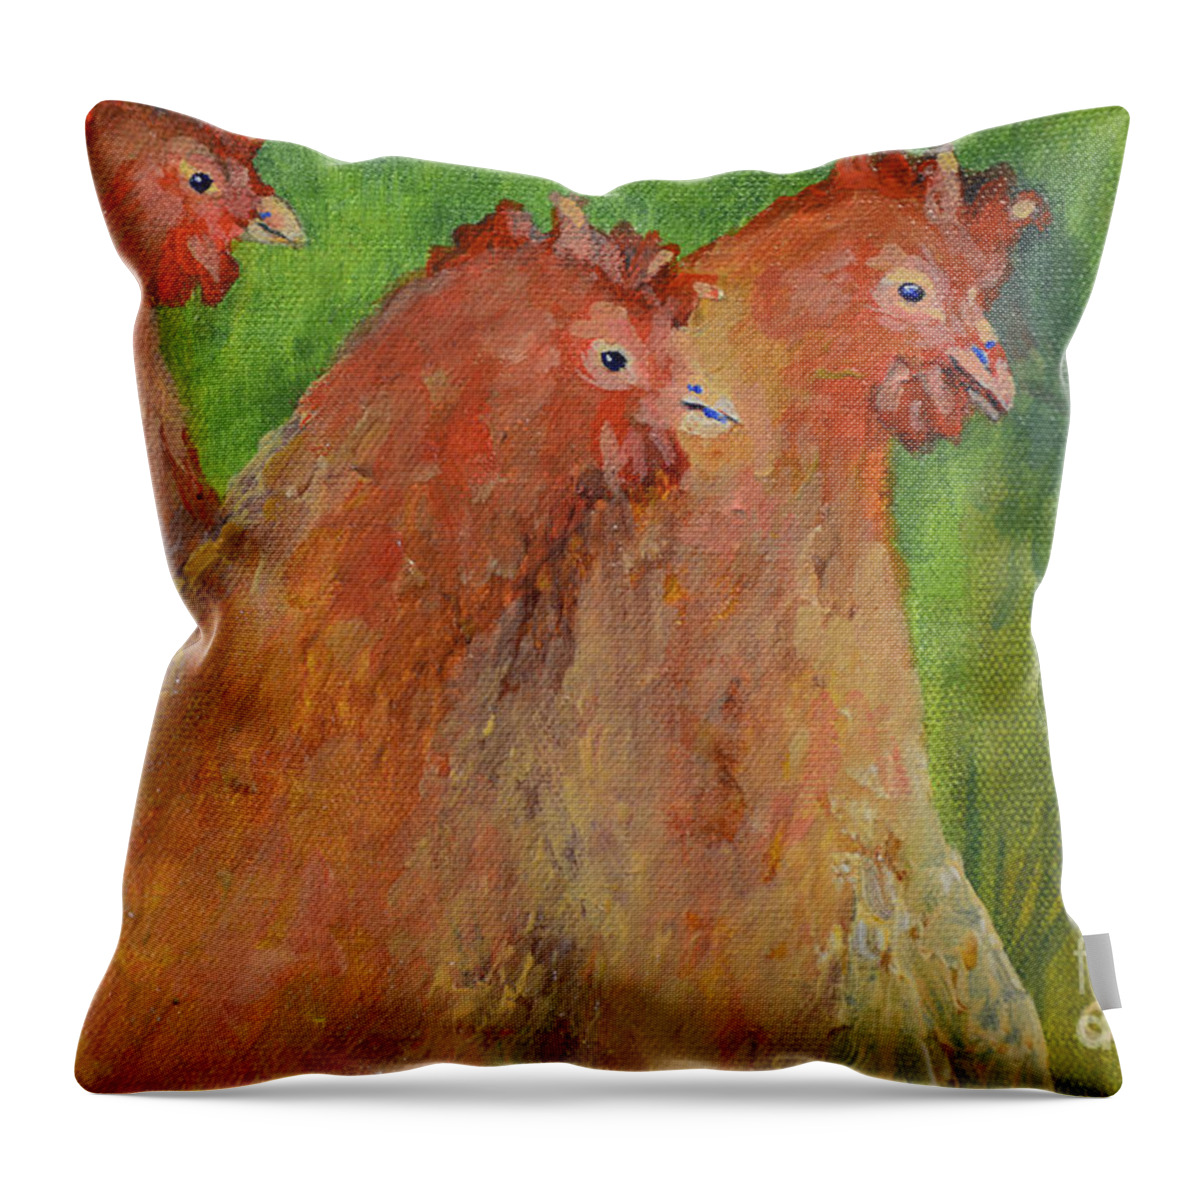 Chickens Throw Pillow featuring the painting Hens and Chickens by Claire Bull